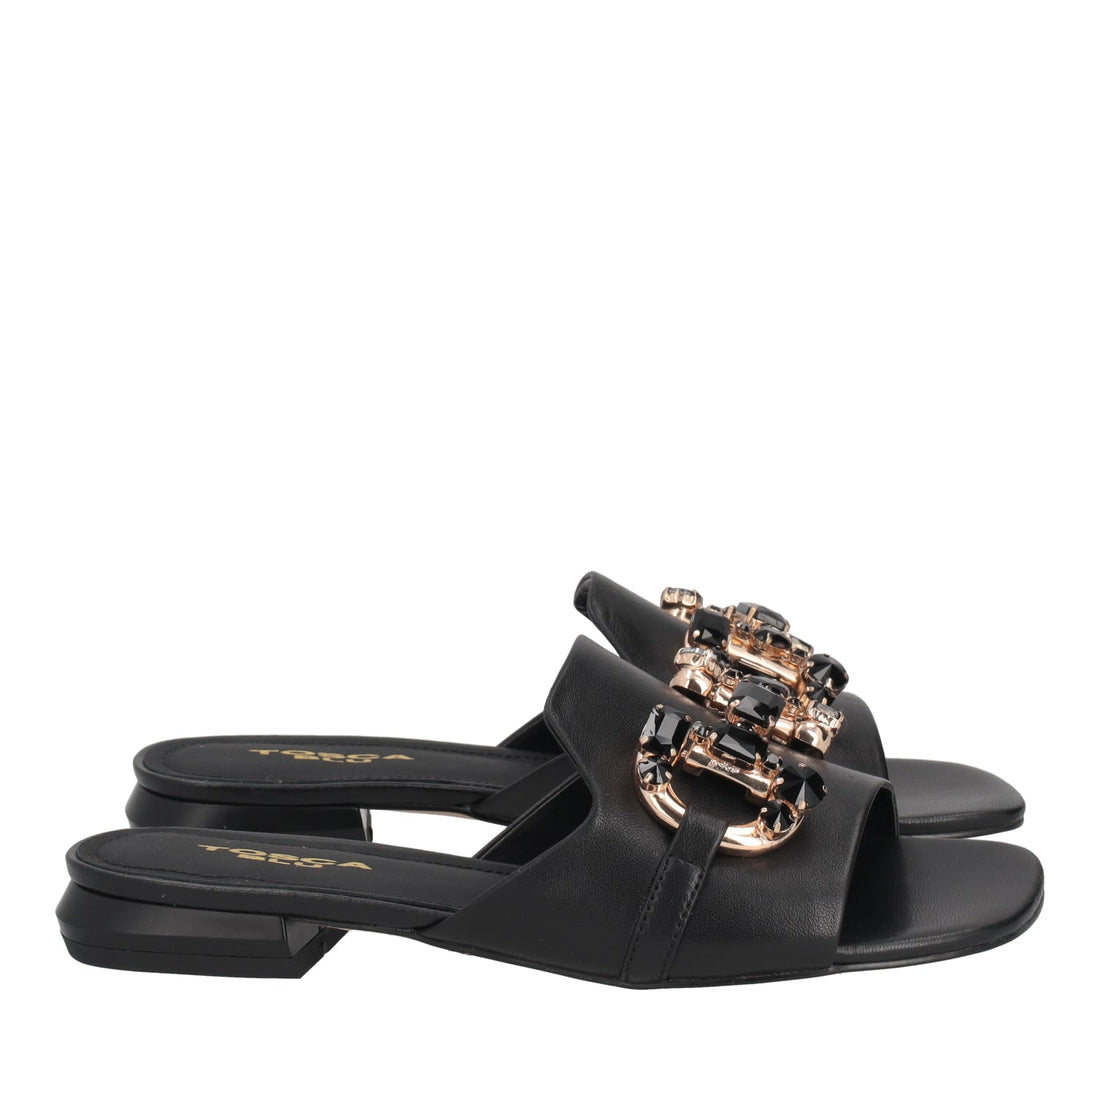 BLACK FLORA JEWEL SLIPPERS IN LEATHER